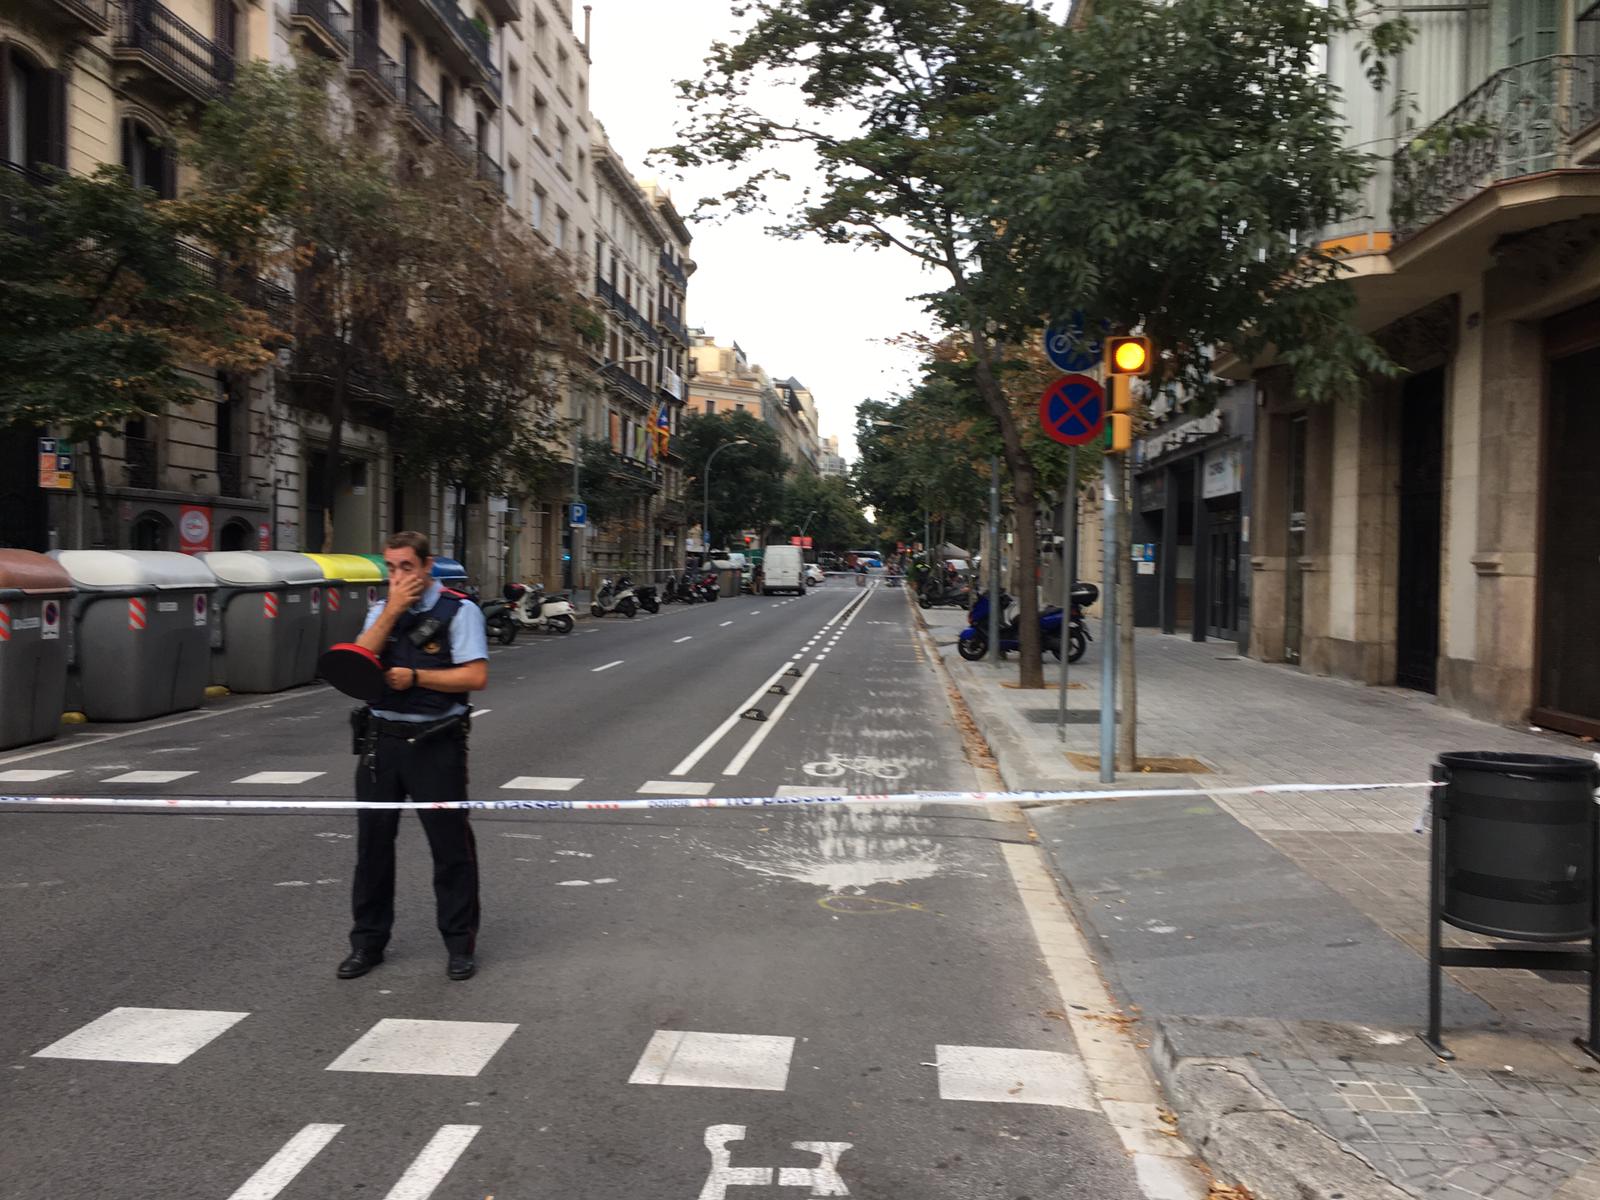 "Suspicious packages" found around Barcelona didn't contain explosives